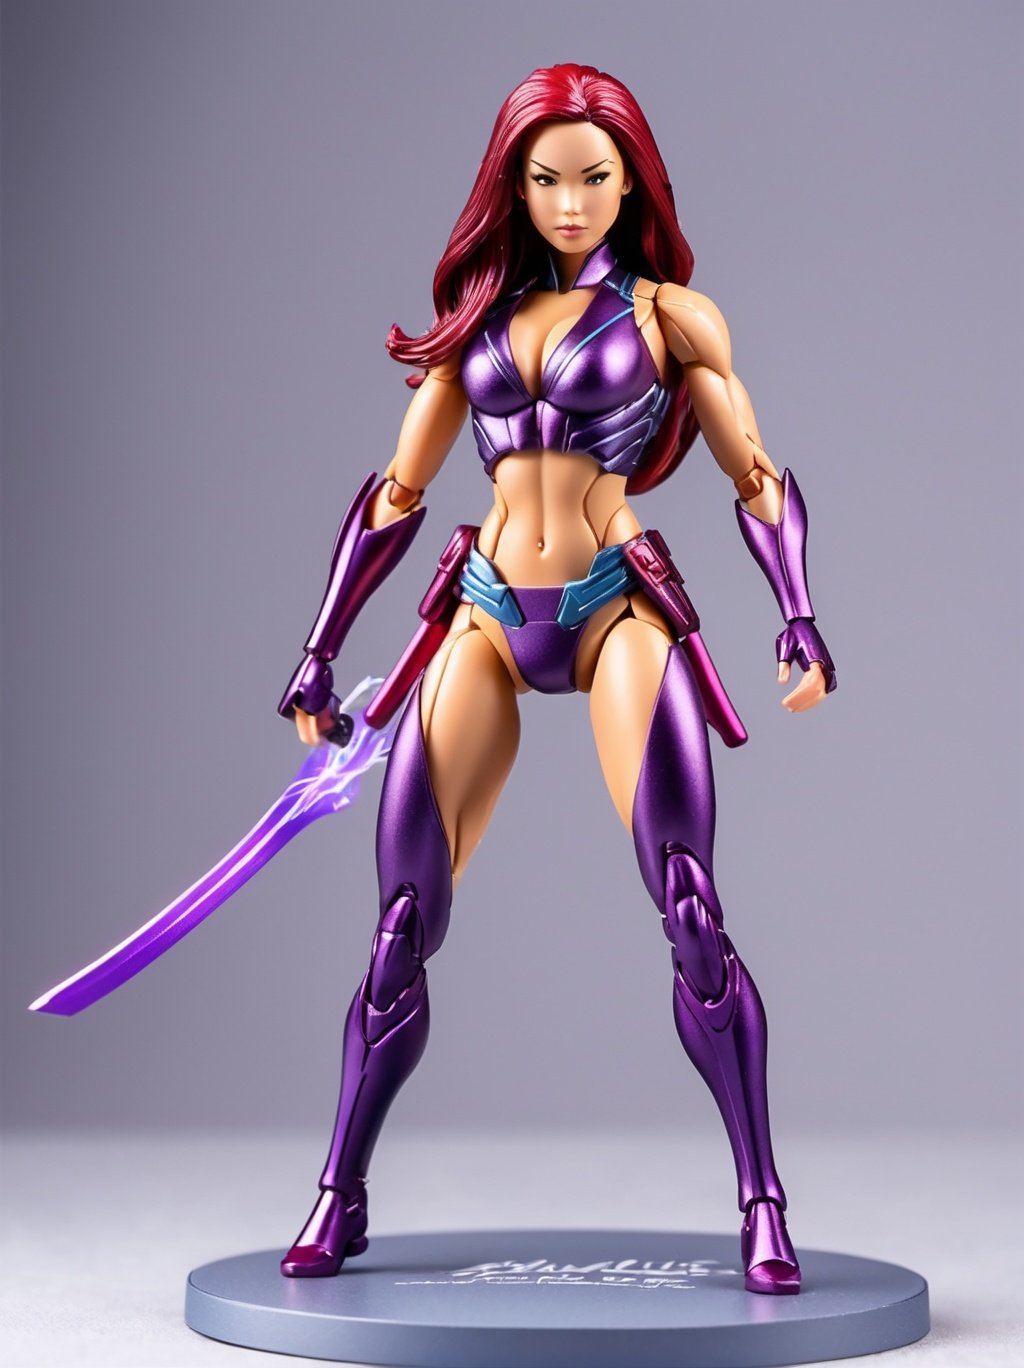 ActionFigureQuiron style, action figure, toy, doll, character print, (best quality:1.15), (masterpiece:1.15), (detailed:1.15), (realistic:1.2), (intricate:1.4), simple background, cover page, card, in a gift box, no humans, ( psylocke ), gift box, playset, in a box, full body, toy playset pack, in a gift box, premium playset toy box,<lyco:SDXL1.0_quiron_ActionFigure_v3_lycoris:0.57>